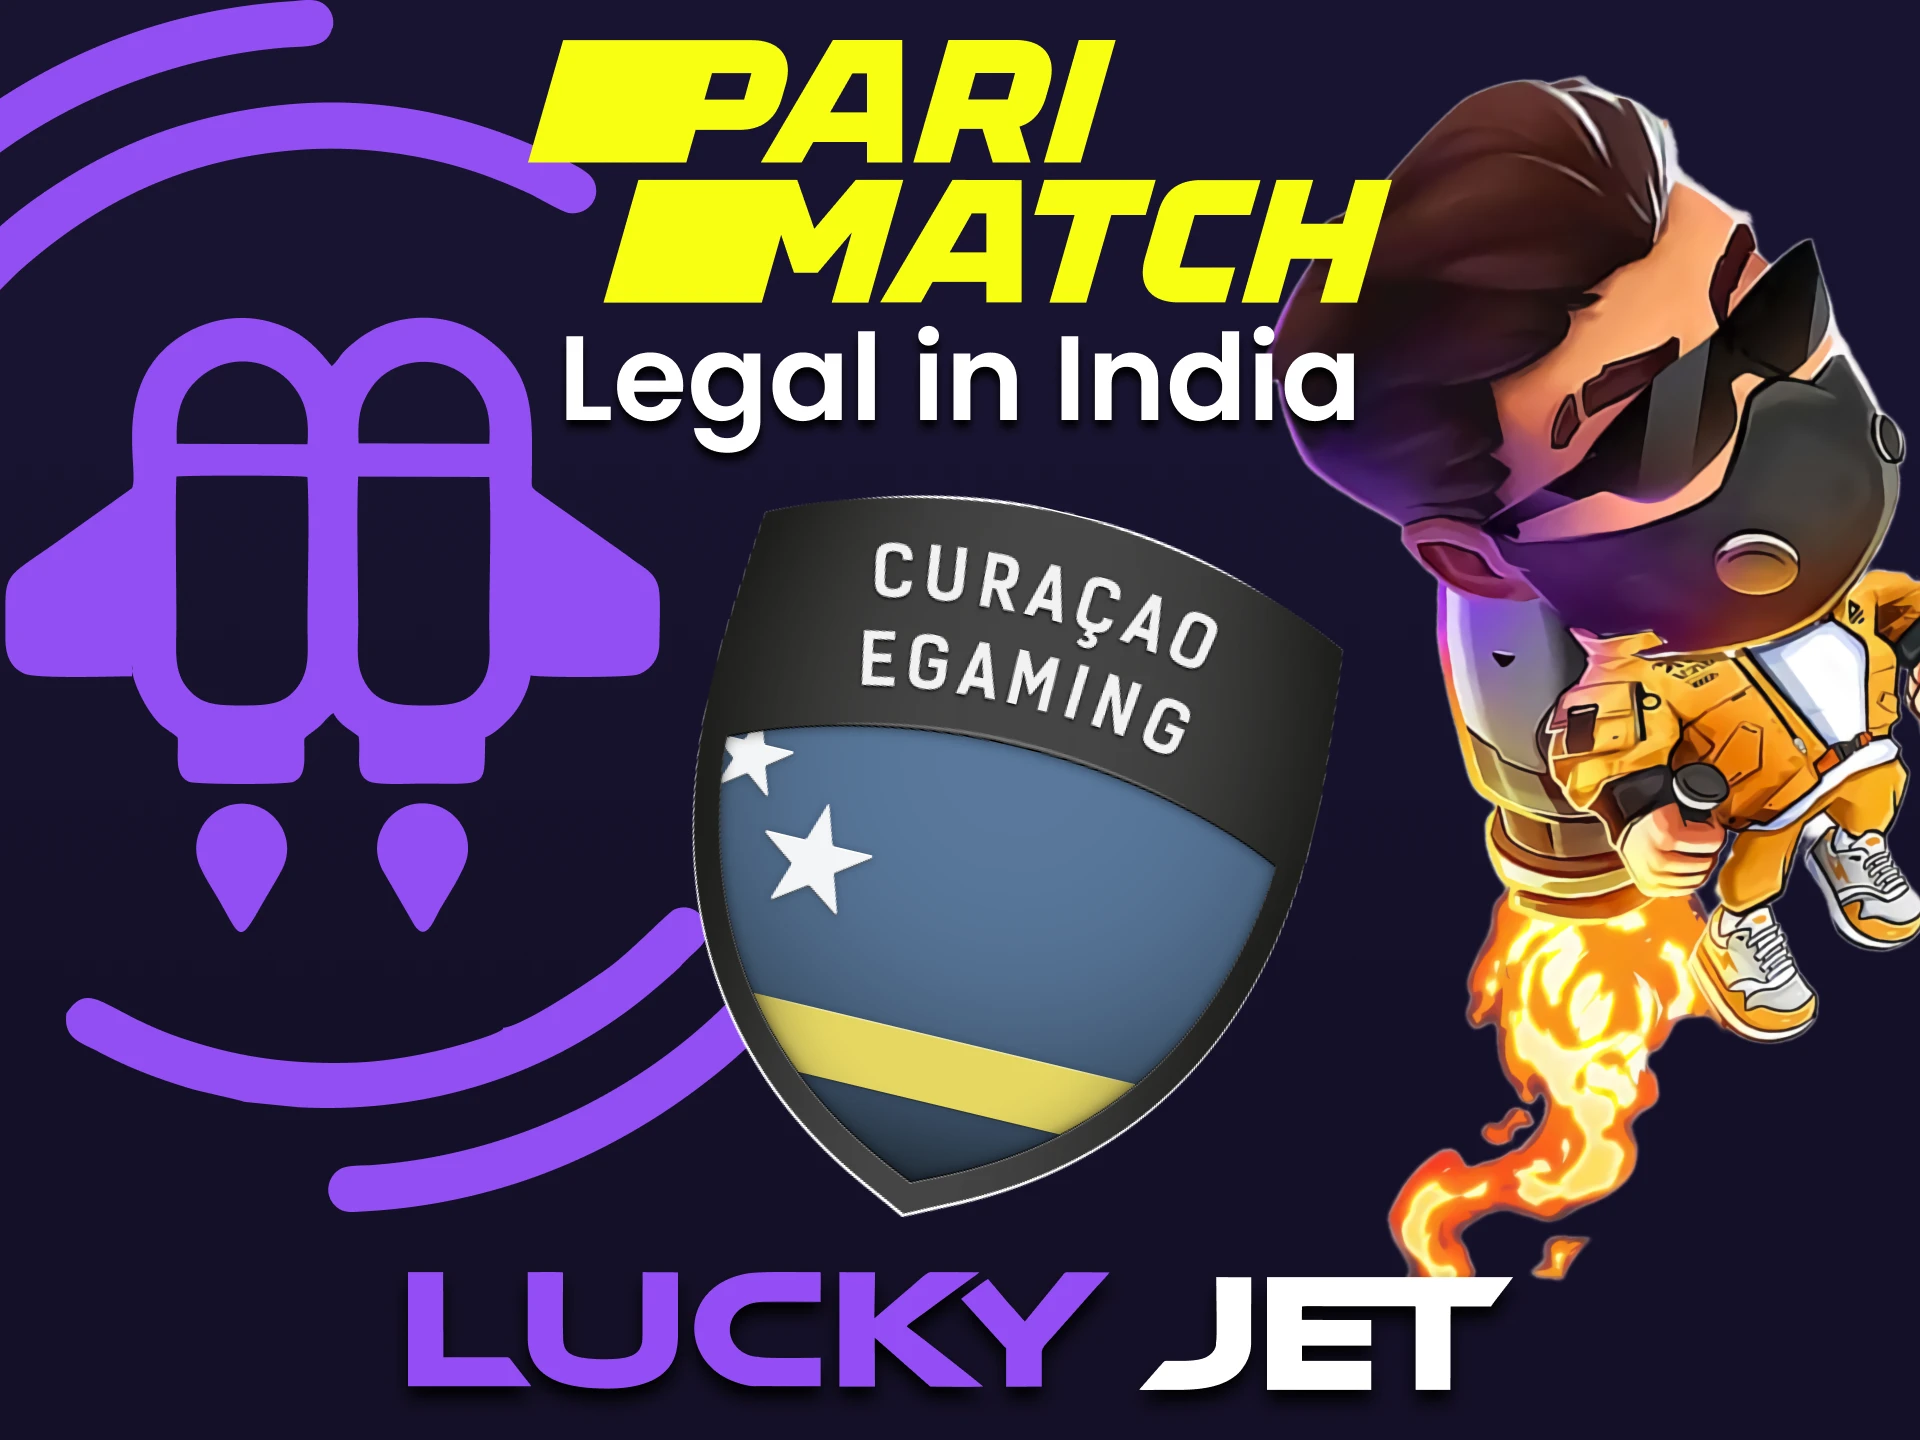 It is absolutely legal to play Lucky Jet on Parimatch.